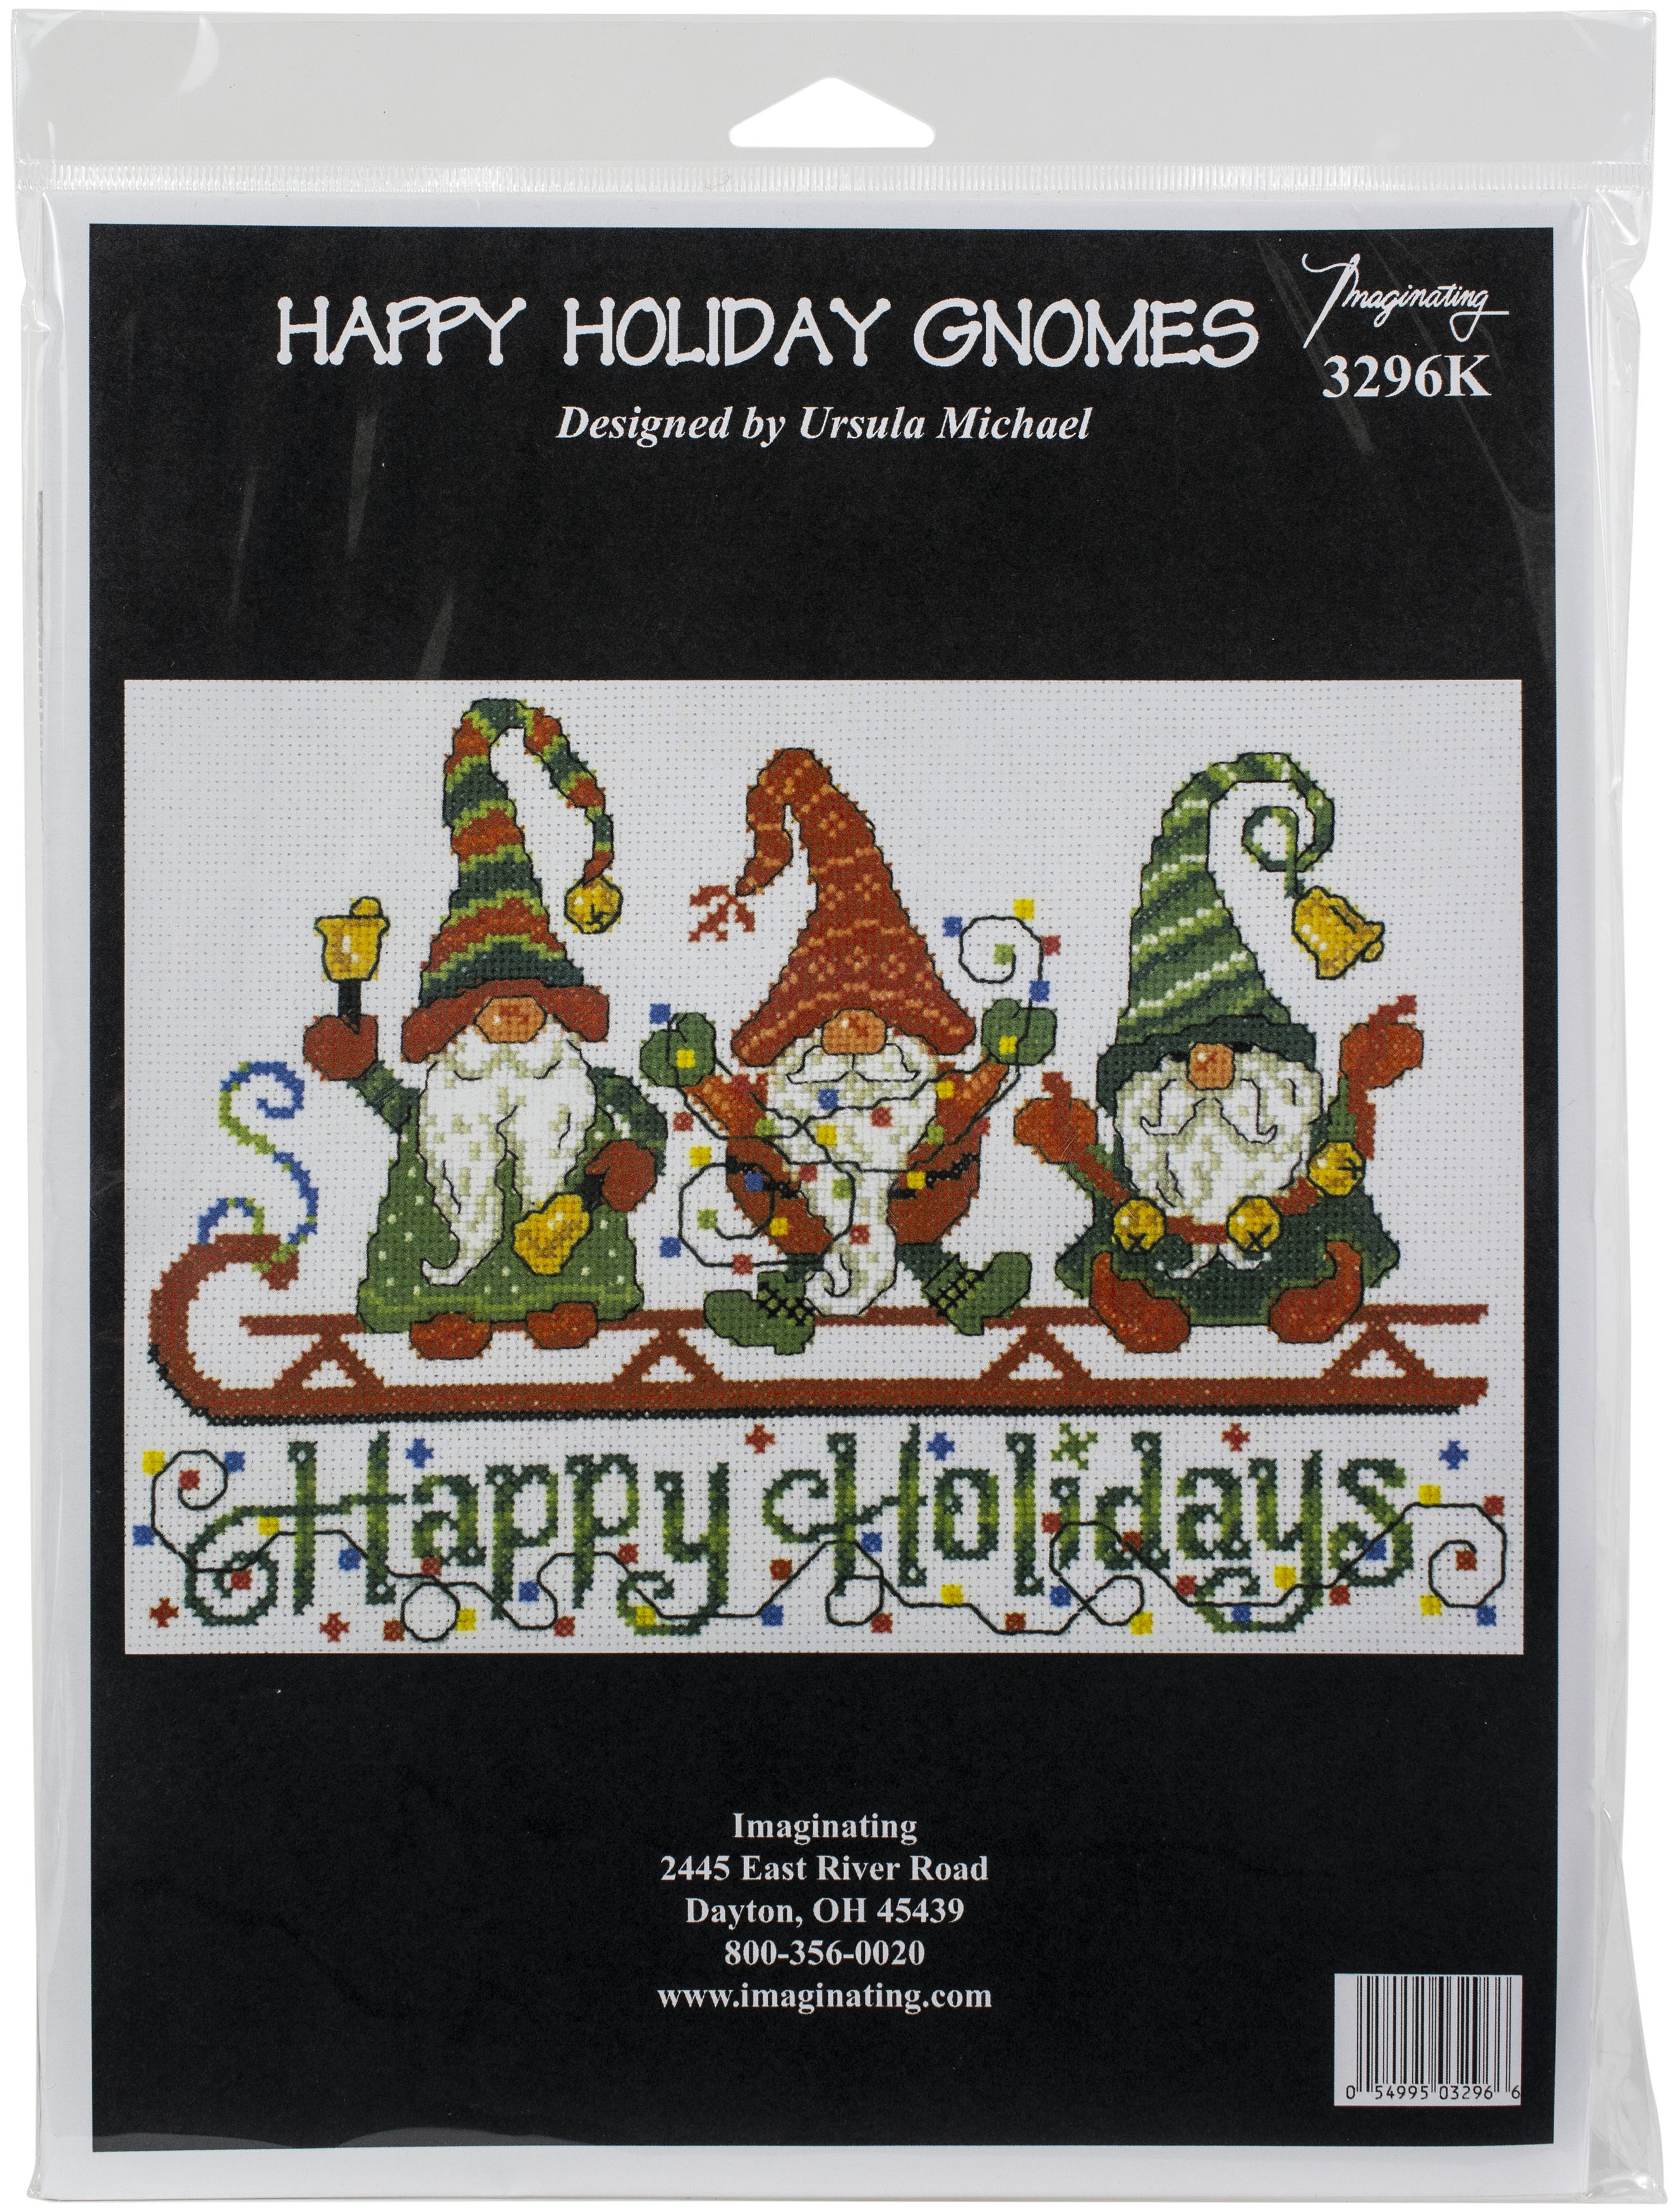 Happy Holiday Gnomes Counted Cross Stitch Kit by Imaginating Cross Stitch Kit